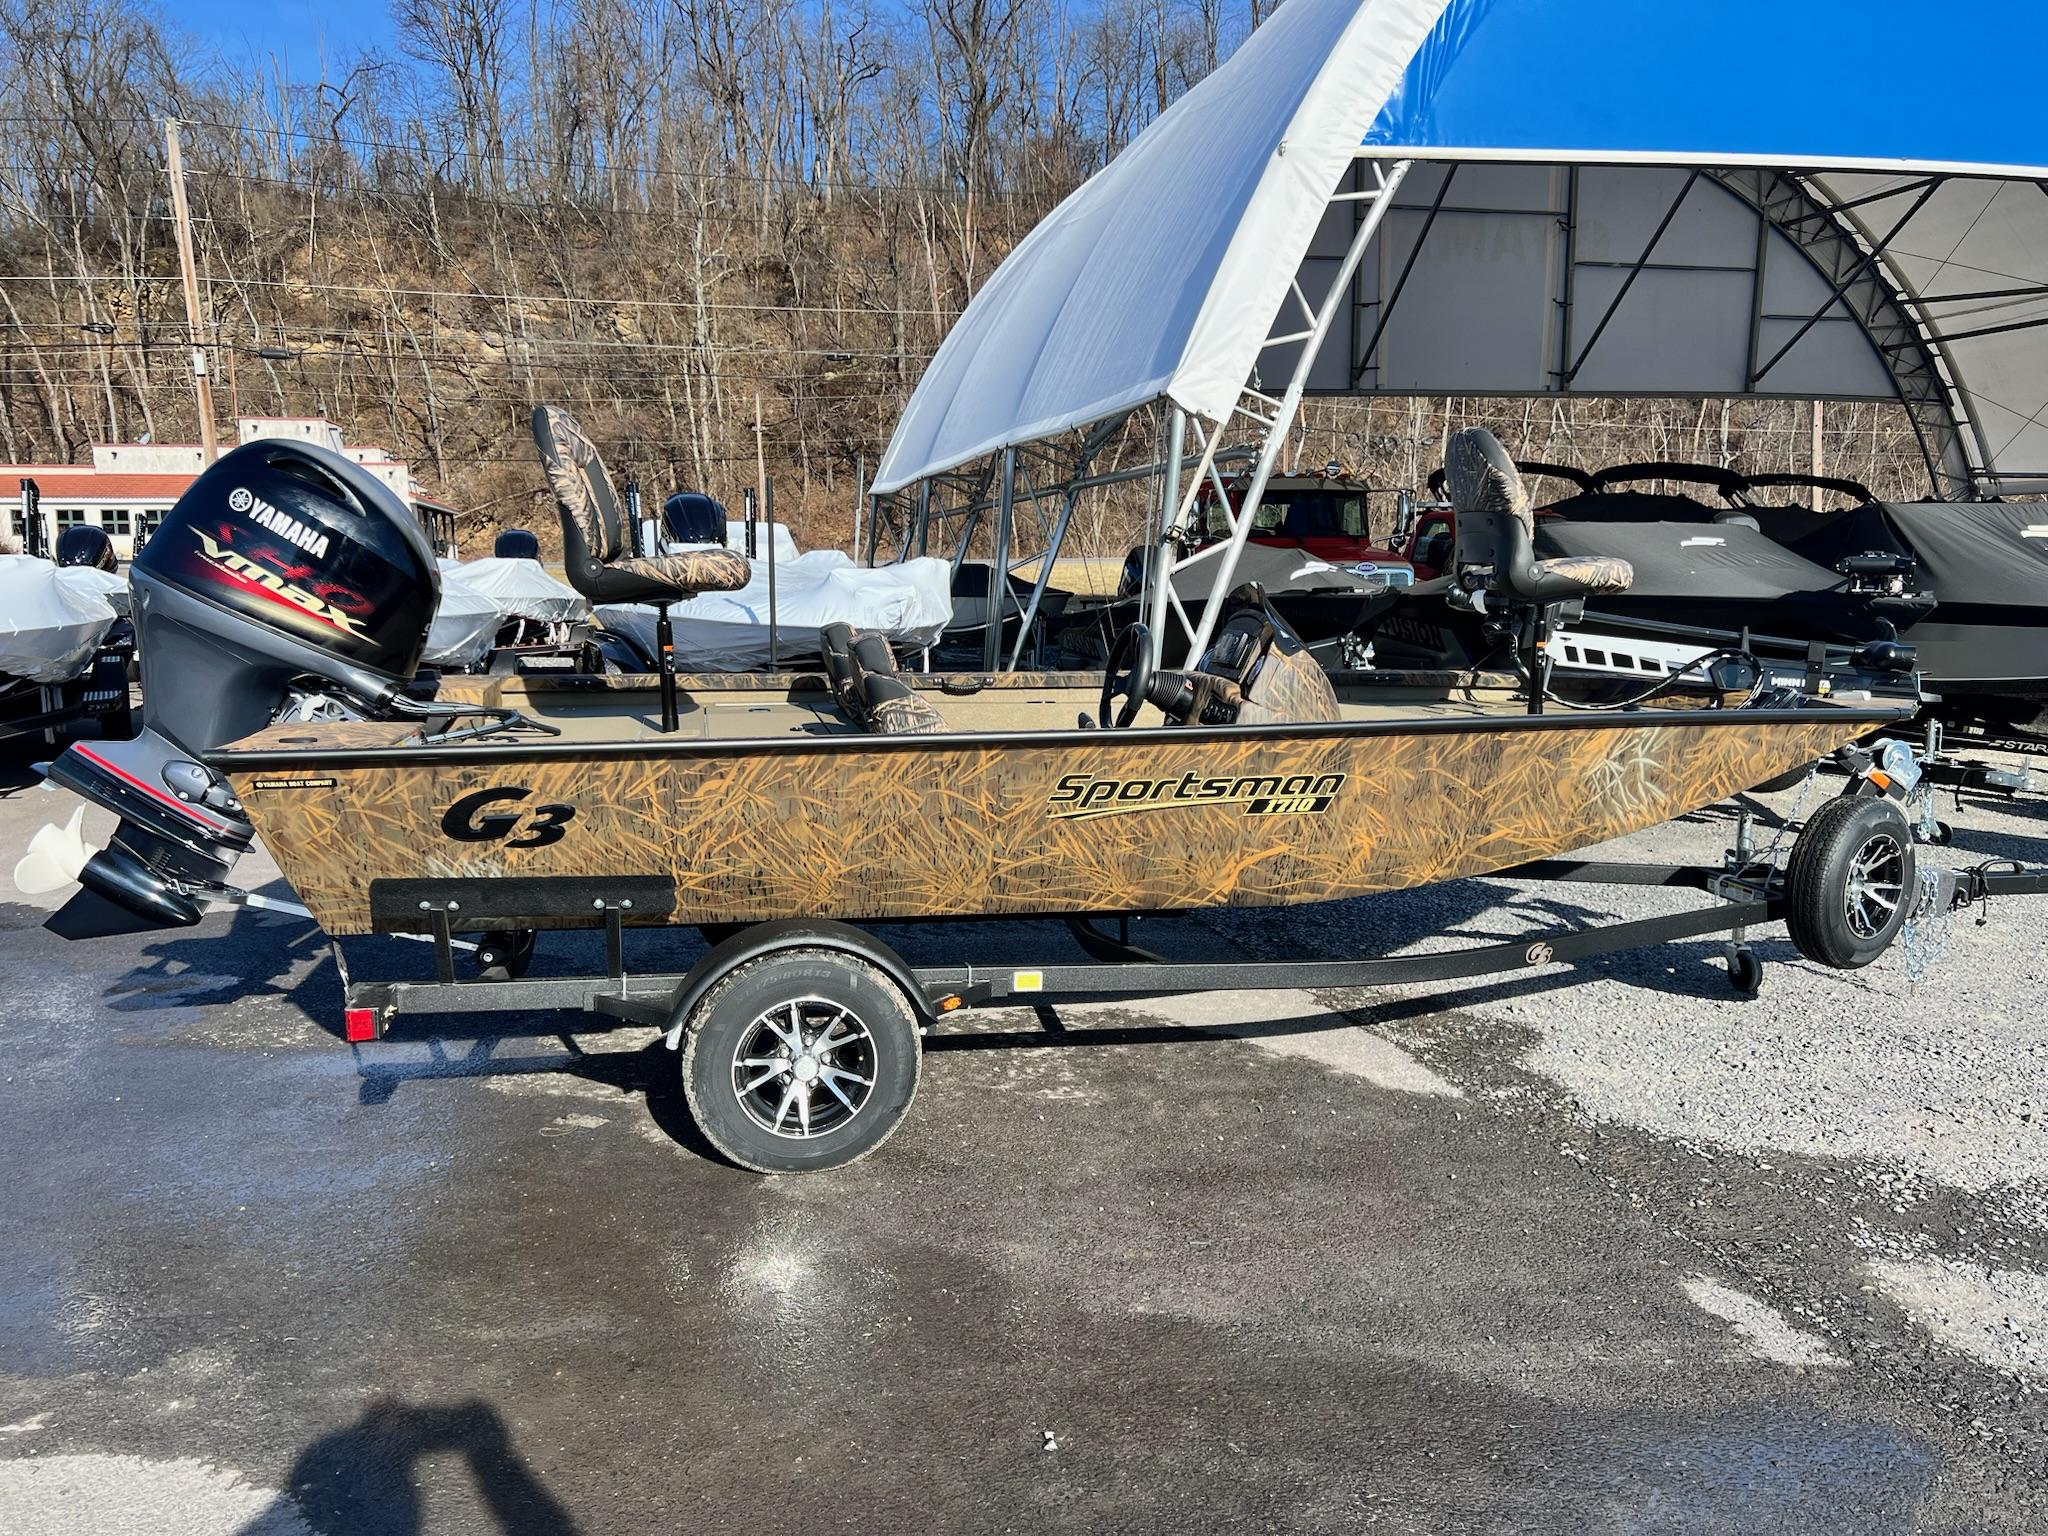 G3 boats for sale - boats.com